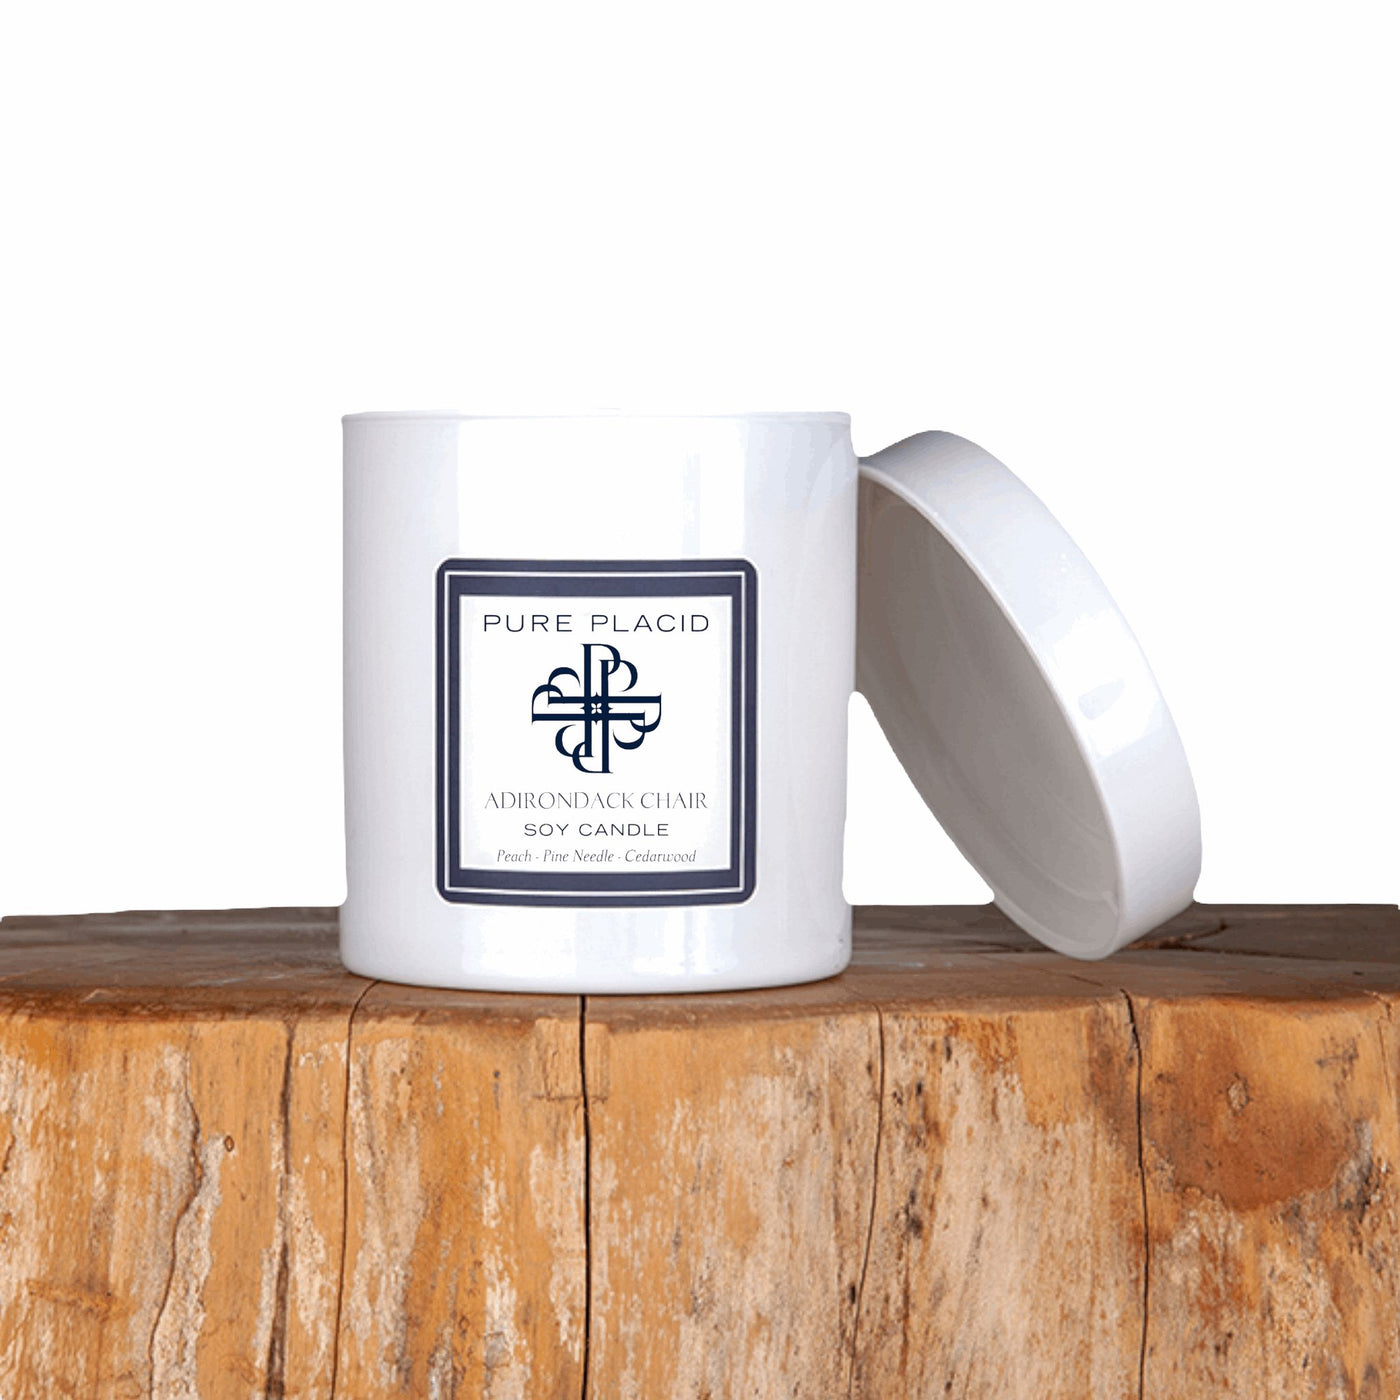 Adirondack Chair Soy Candle-Soy Candle-Pure Placid